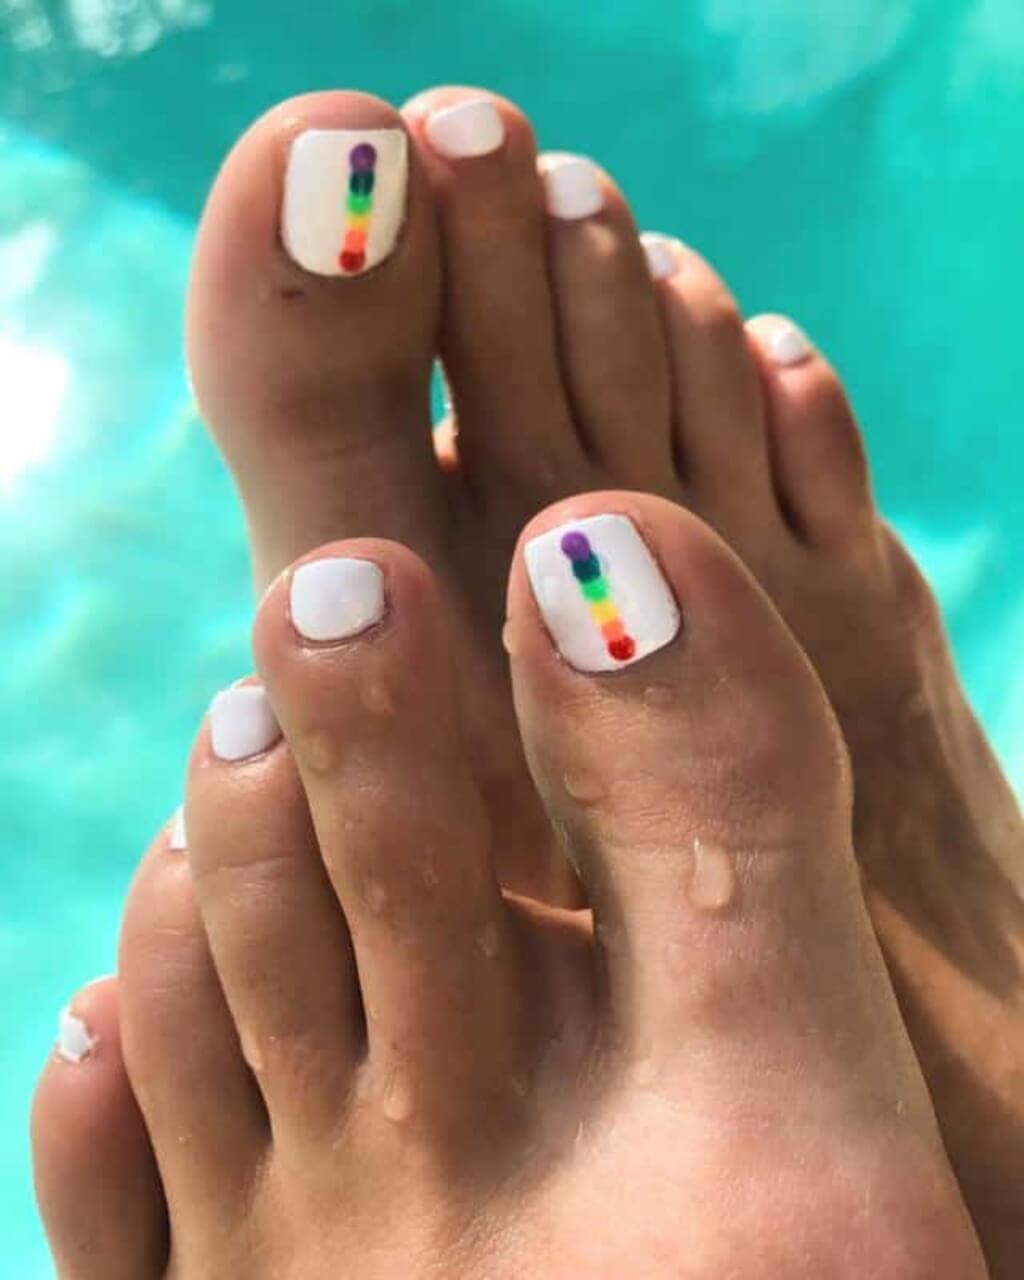 A women's feet with white and rainbow toenails
